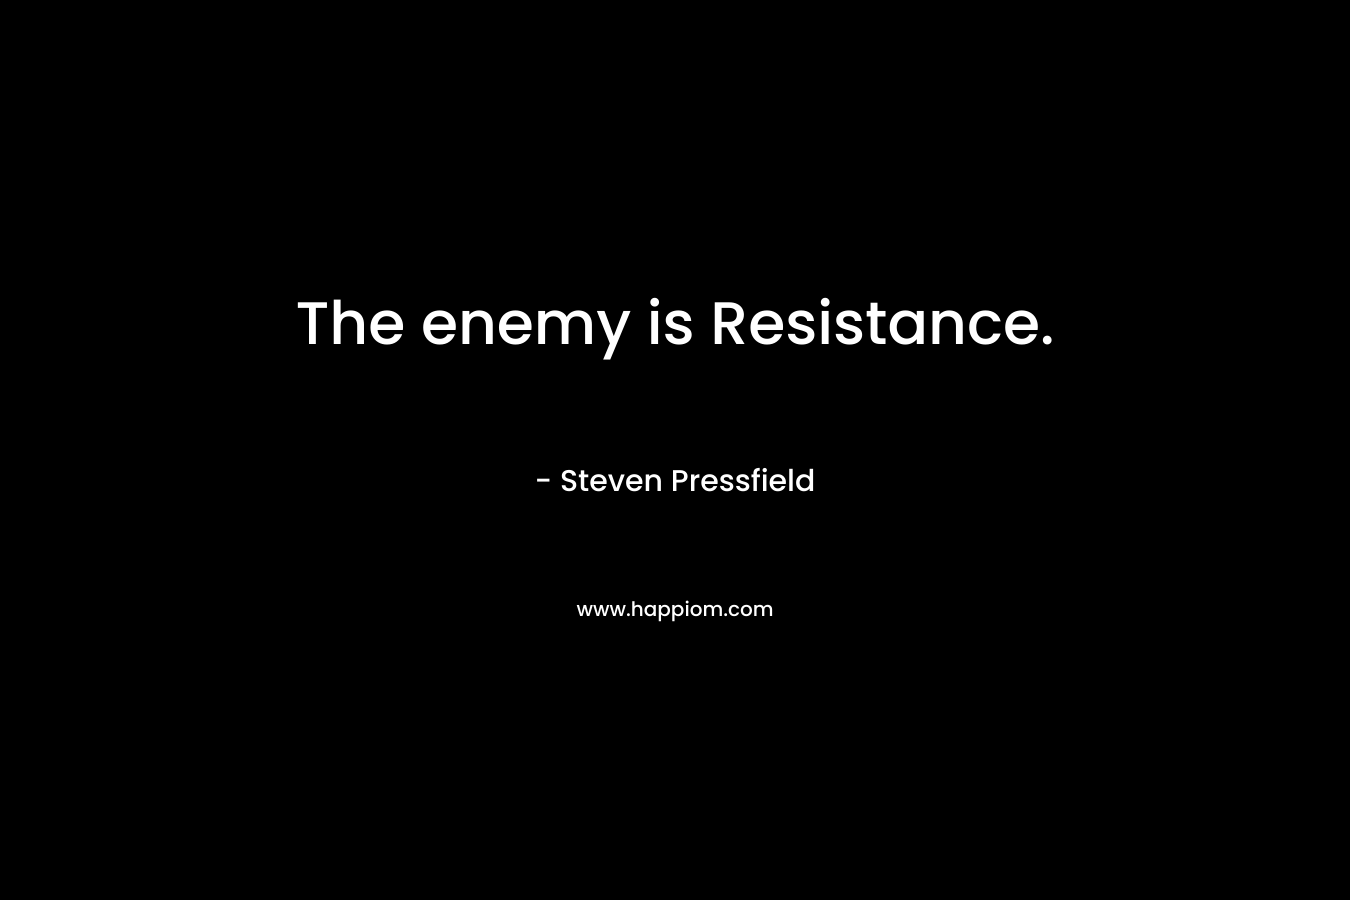 The enemy is Resistance.